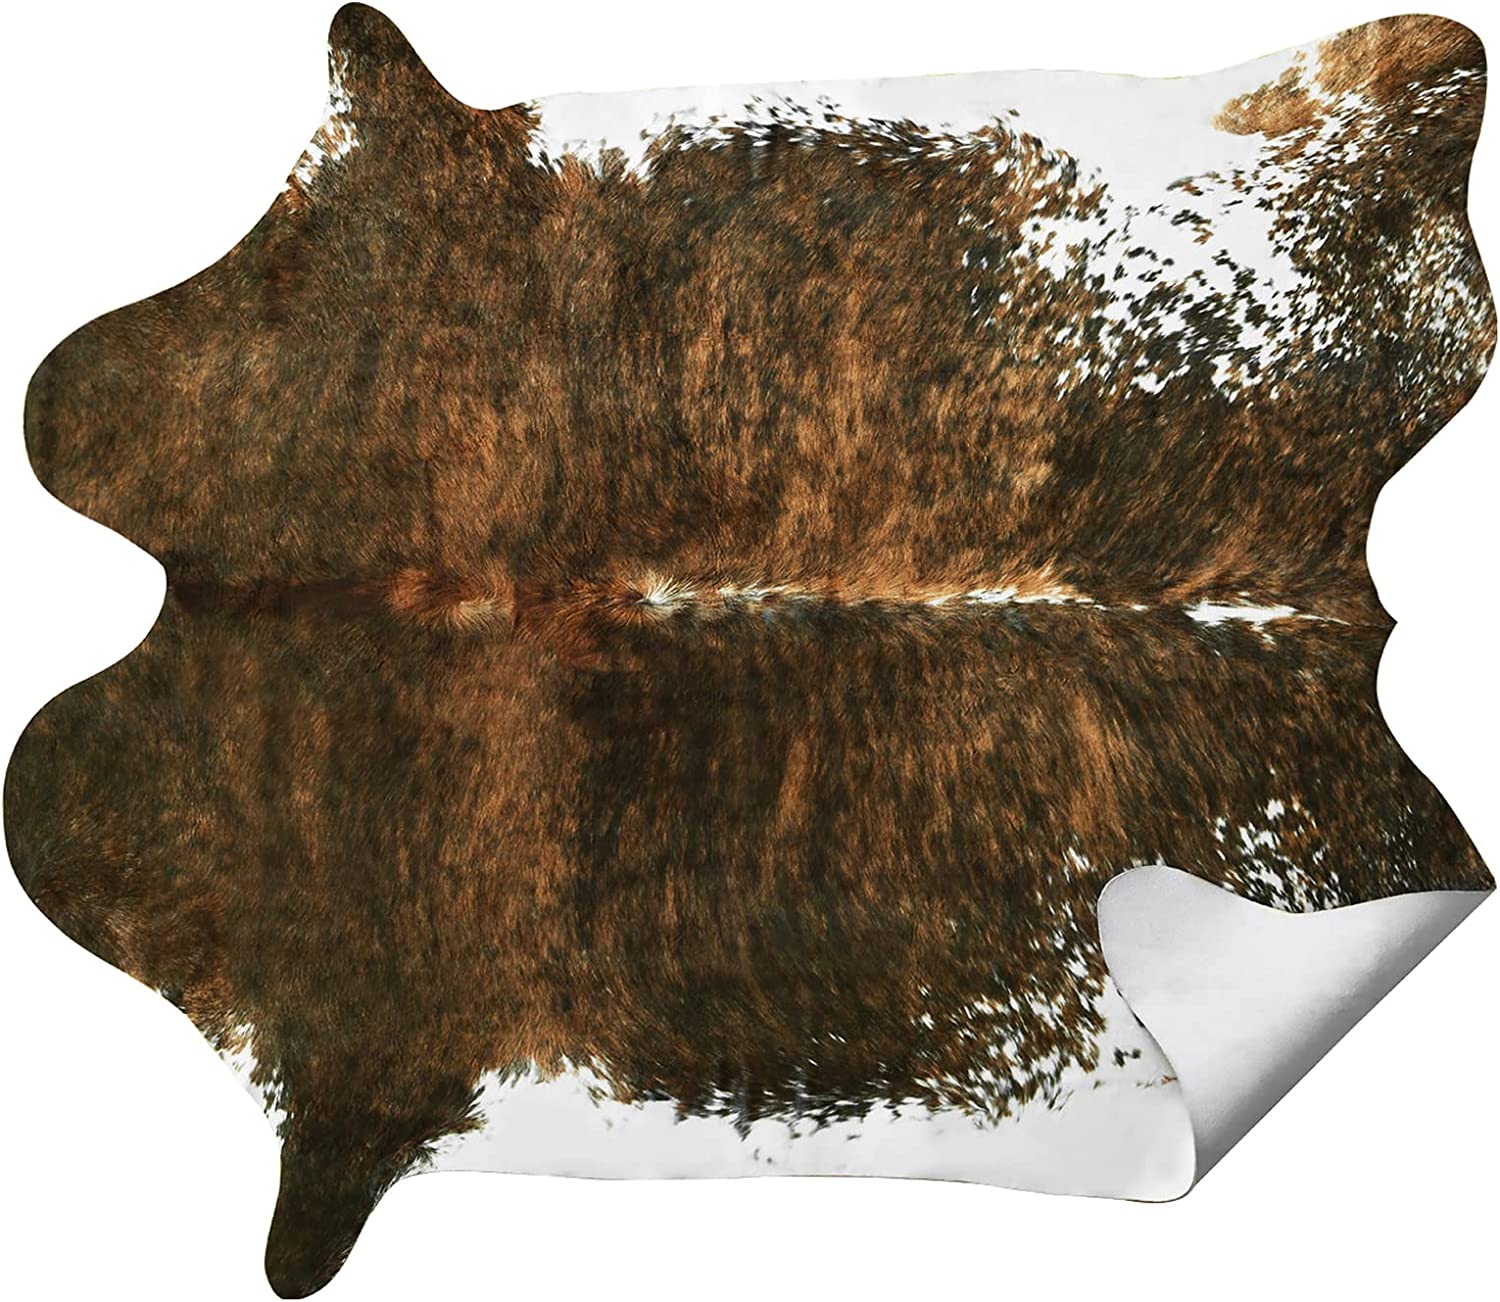 Modern Cowhide Fake Fur Rug For Living Room American Style Coffee Table Carpet Rug - 12 Styles, 3 Sizes